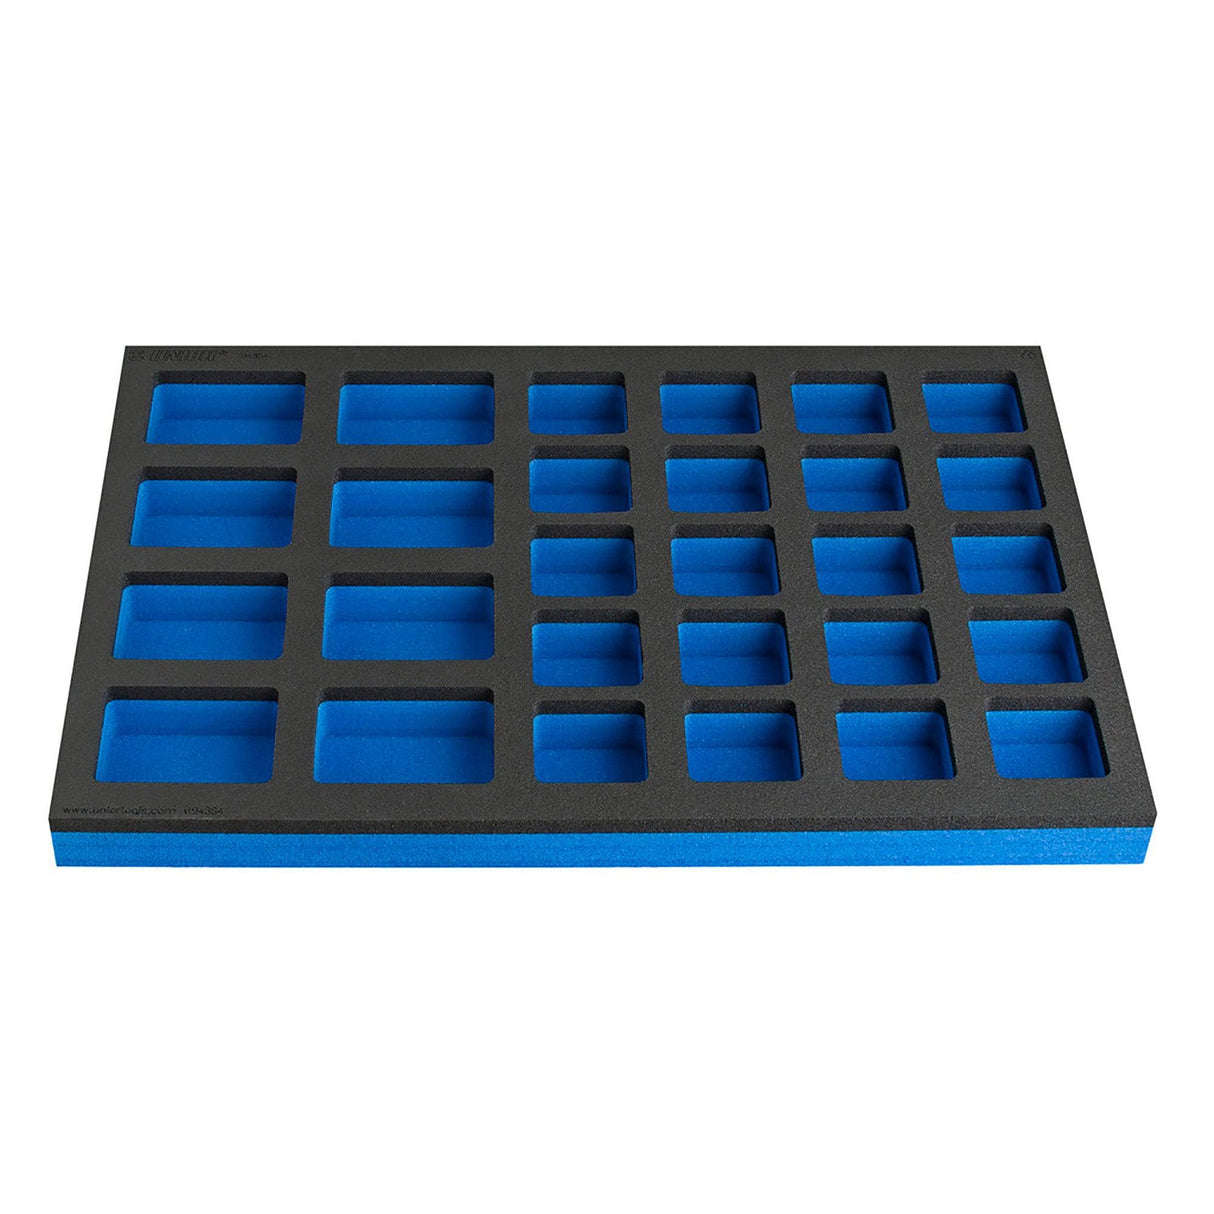 Unior Sos Tool Tray With Compartment For Work Bench Narrow Tool Chest (28 Compartments):  570 X 374Mm